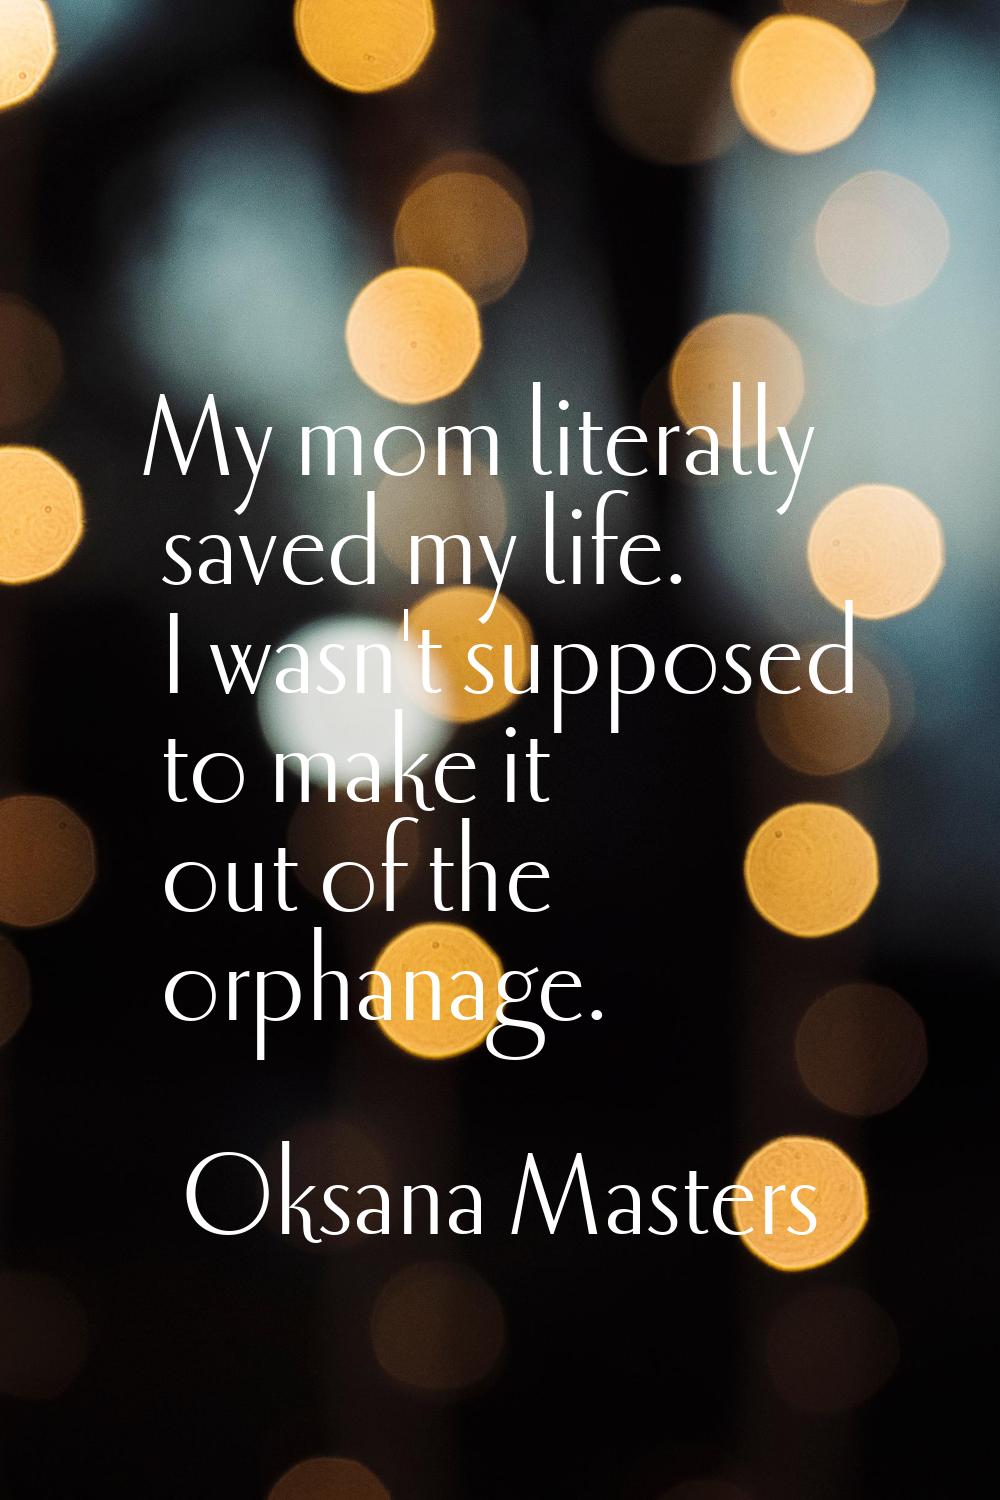 My mom literally saved my life. I wasn't supposed to make it out of the orphanage.